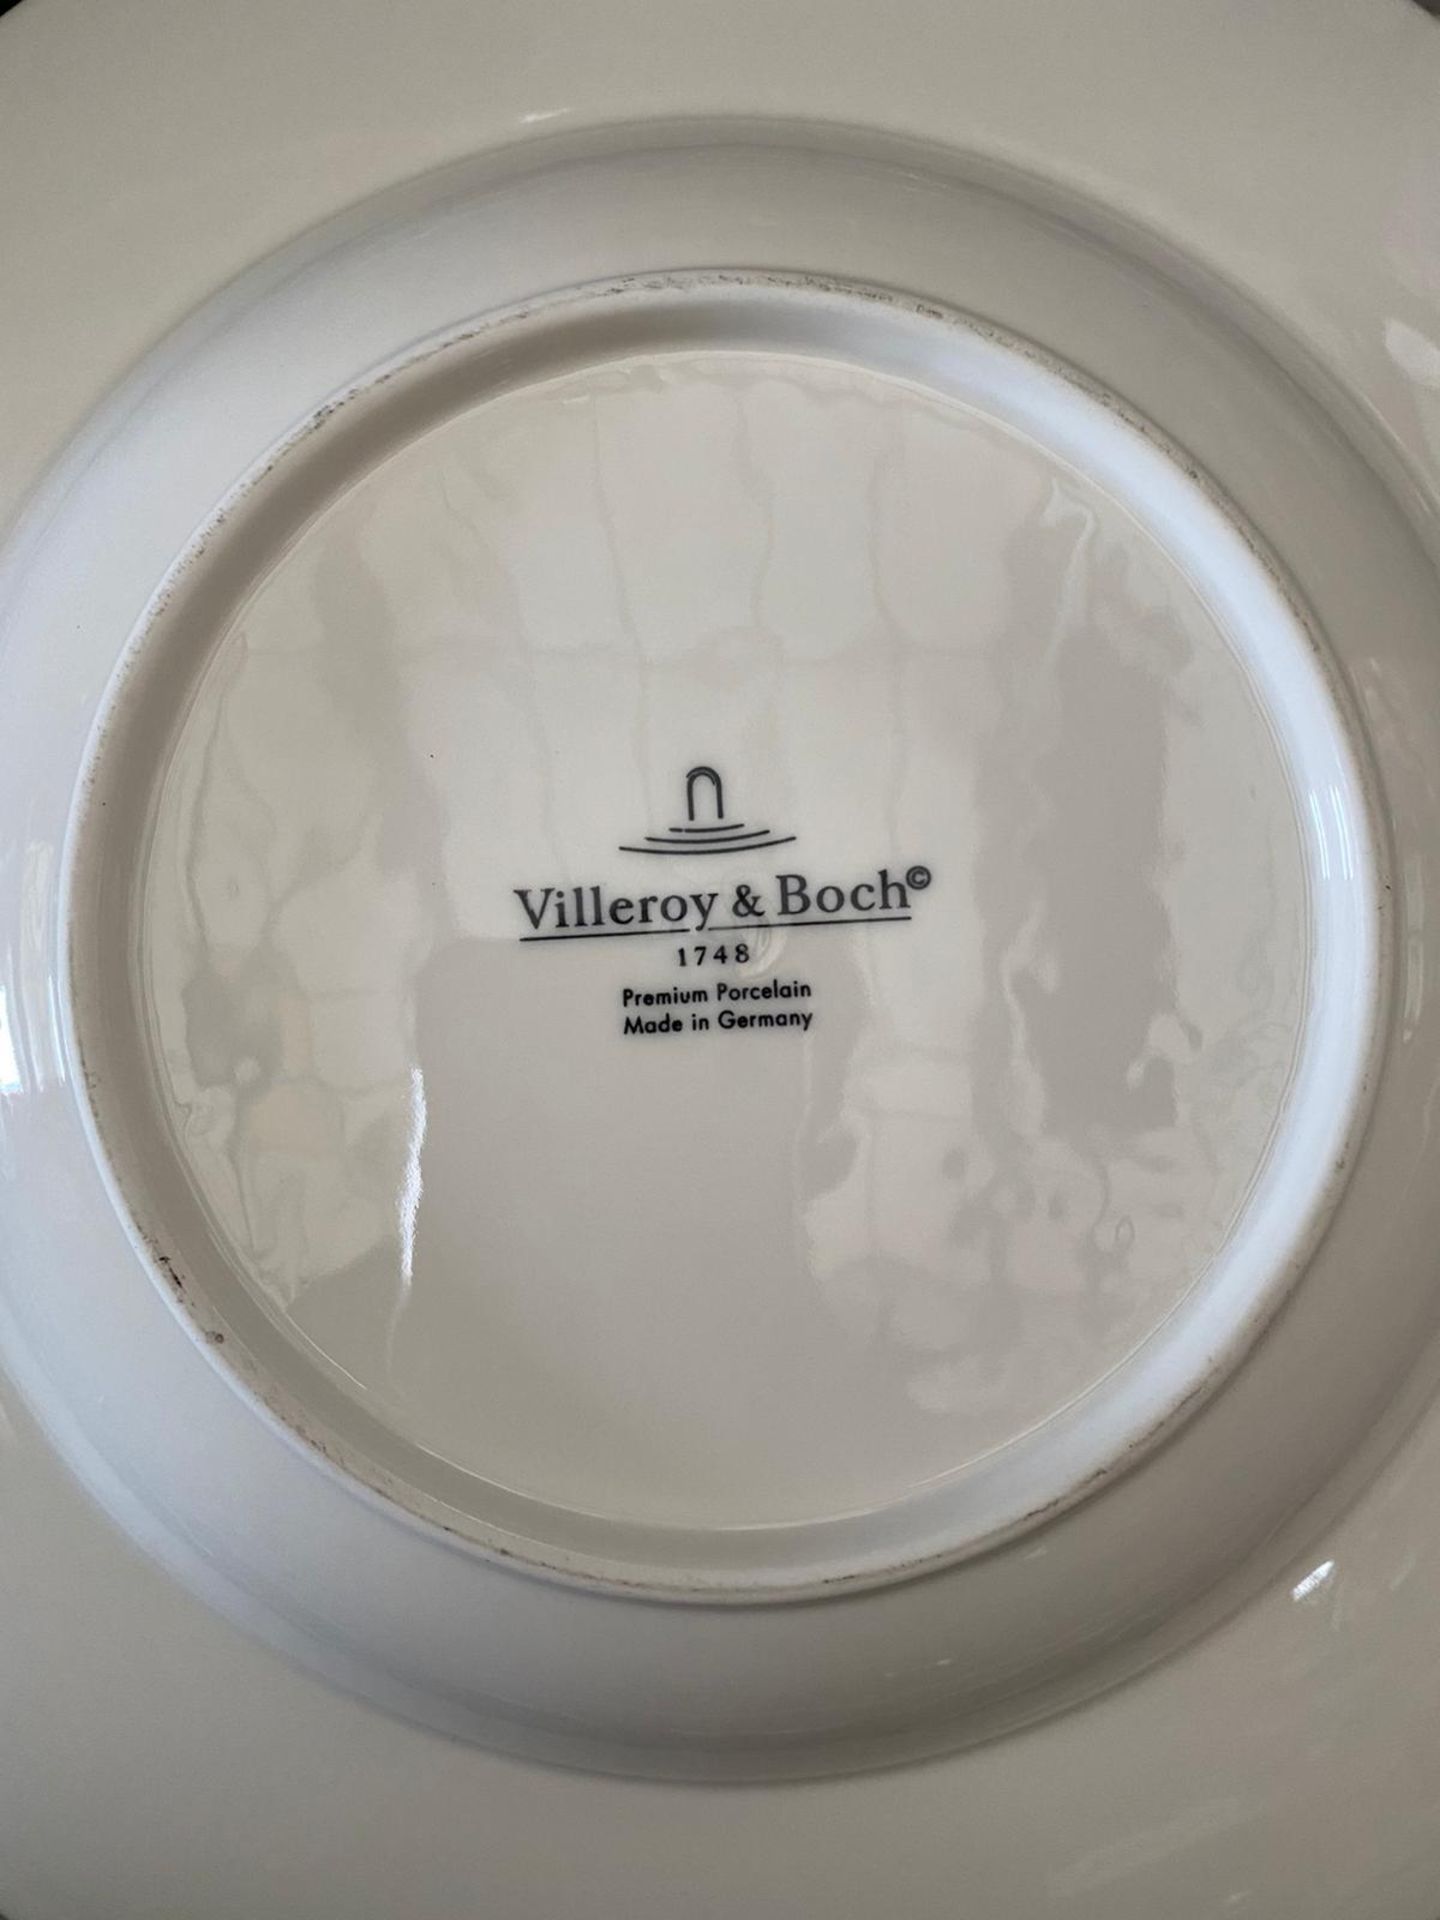 10 x Villeroy & Boch Royal Dinner Plate - 290mm - Ref: 1044122620 - New and unused without Box - - Image 3 of 5